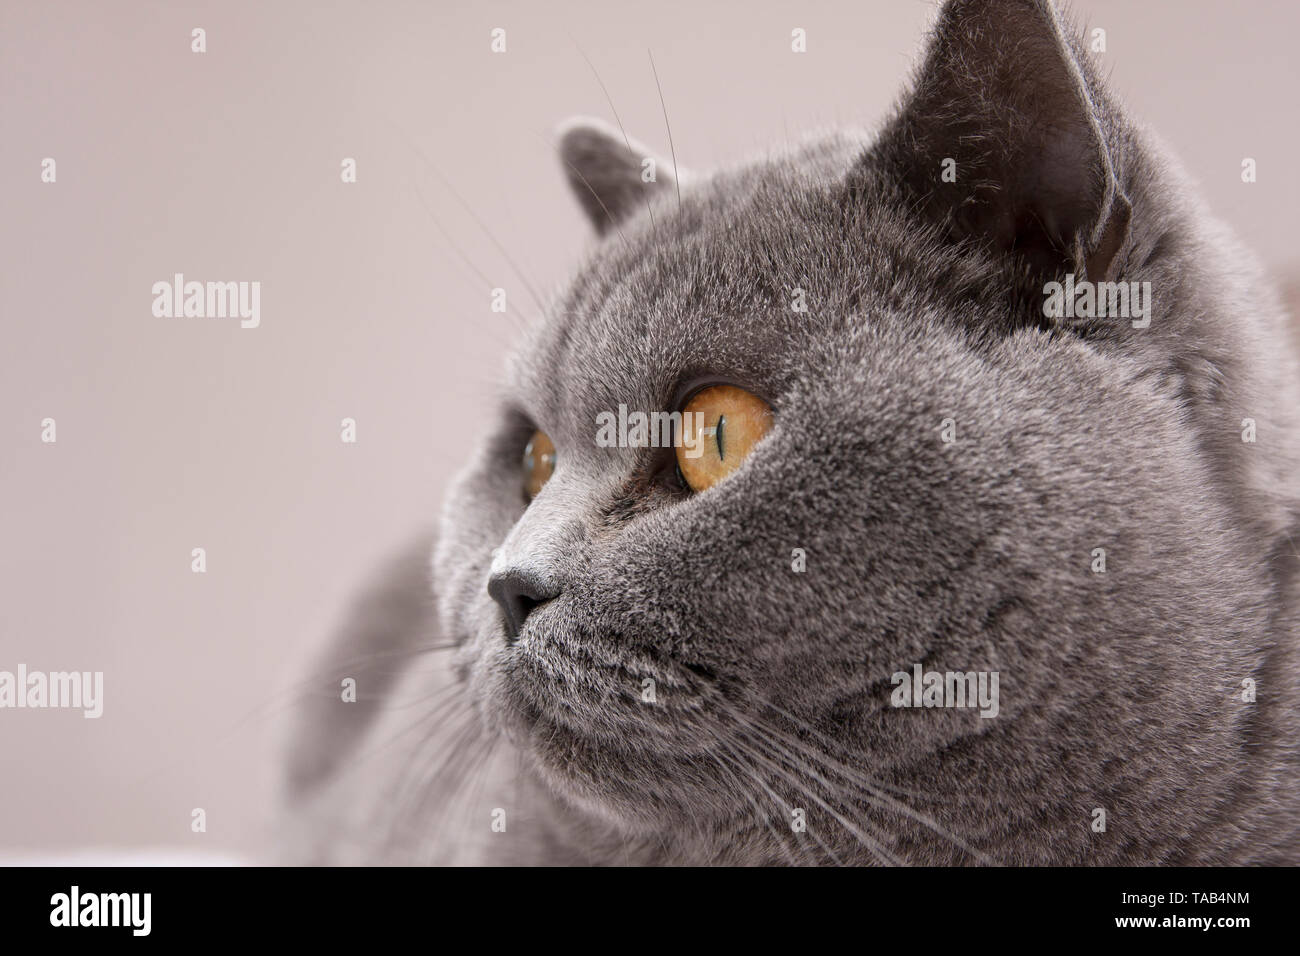 Portrait Of British Short Hair Blue Cat With Yellow Eyes Stock Photo -  Download Image Now - iStock